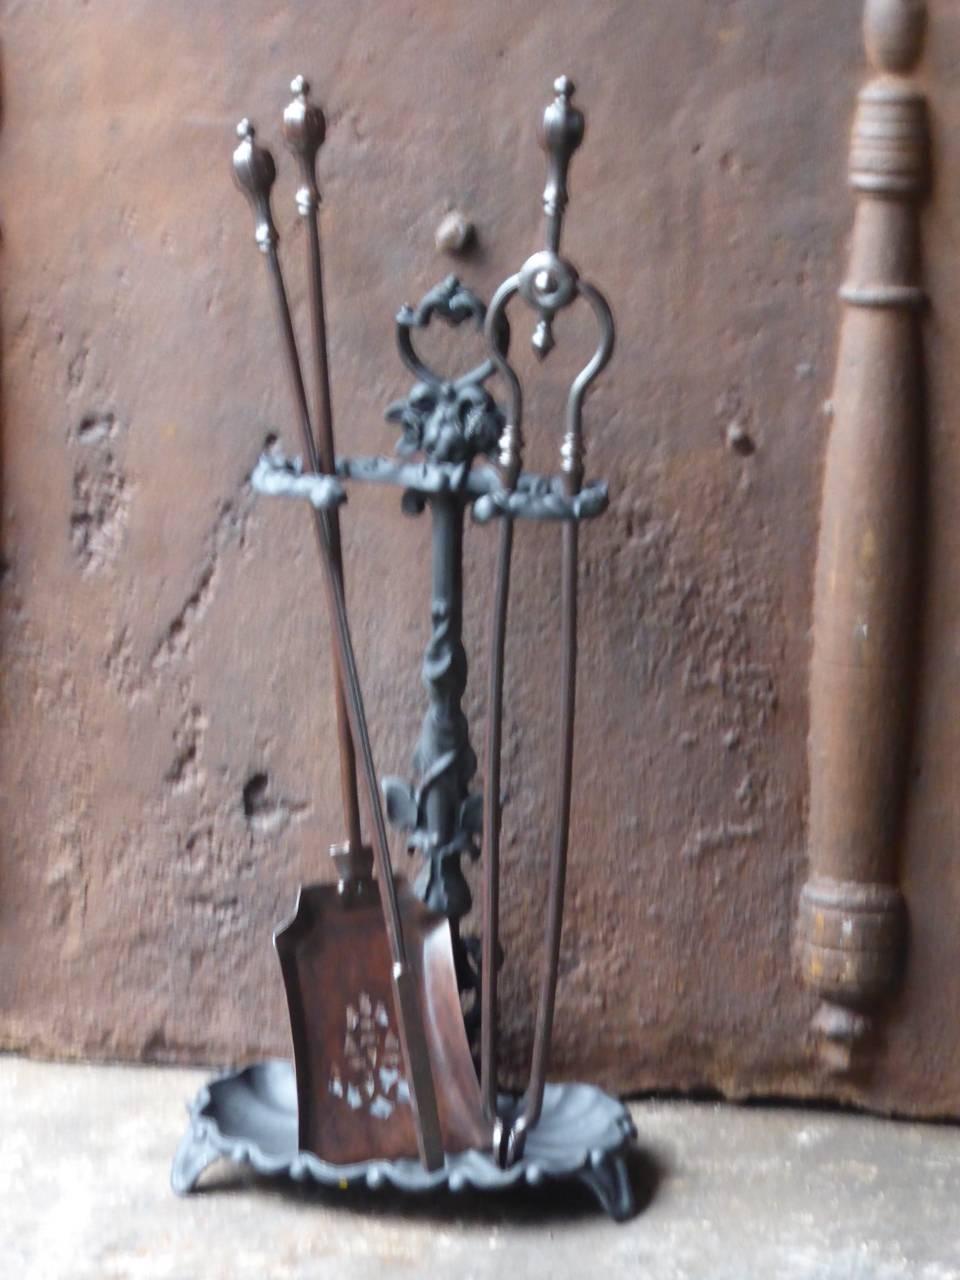 A set of victorian fire irons made of wrought iron with an ornate stand of cast iron.  The condition is good.

